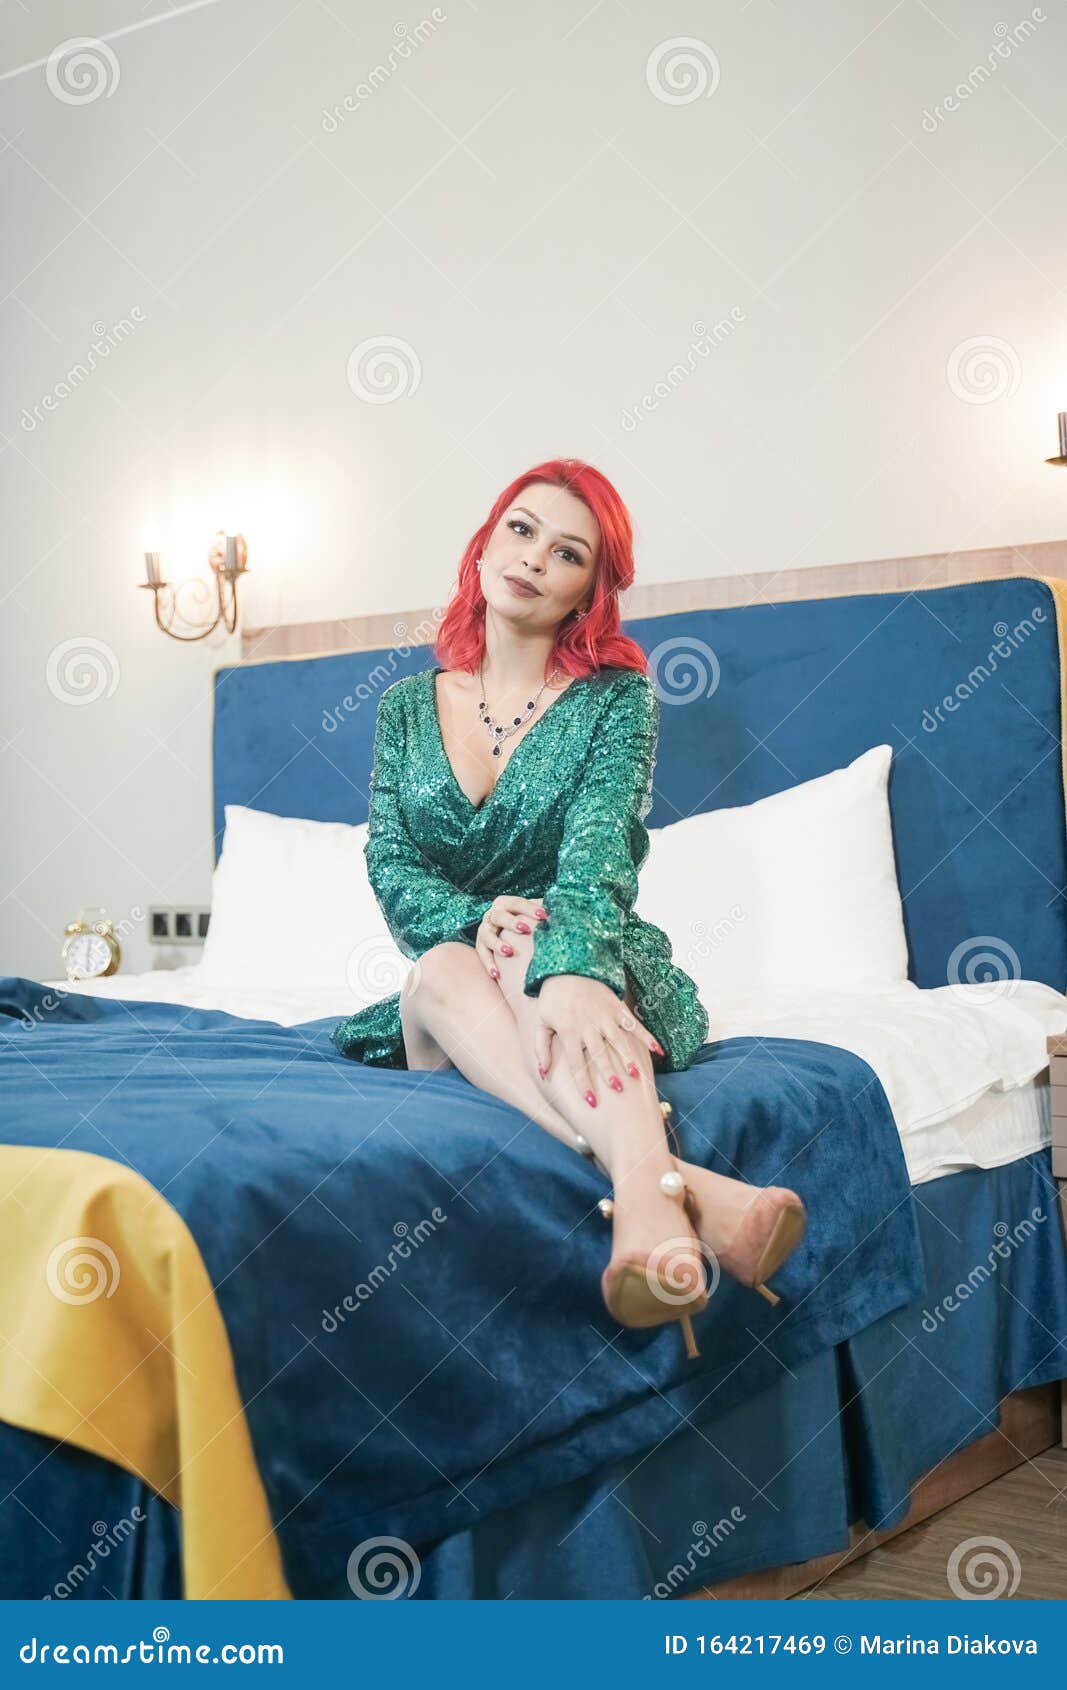 sexy woman in green stylish sparkling glitter dress ready for christmas party and relaz by waiting in her bed alone